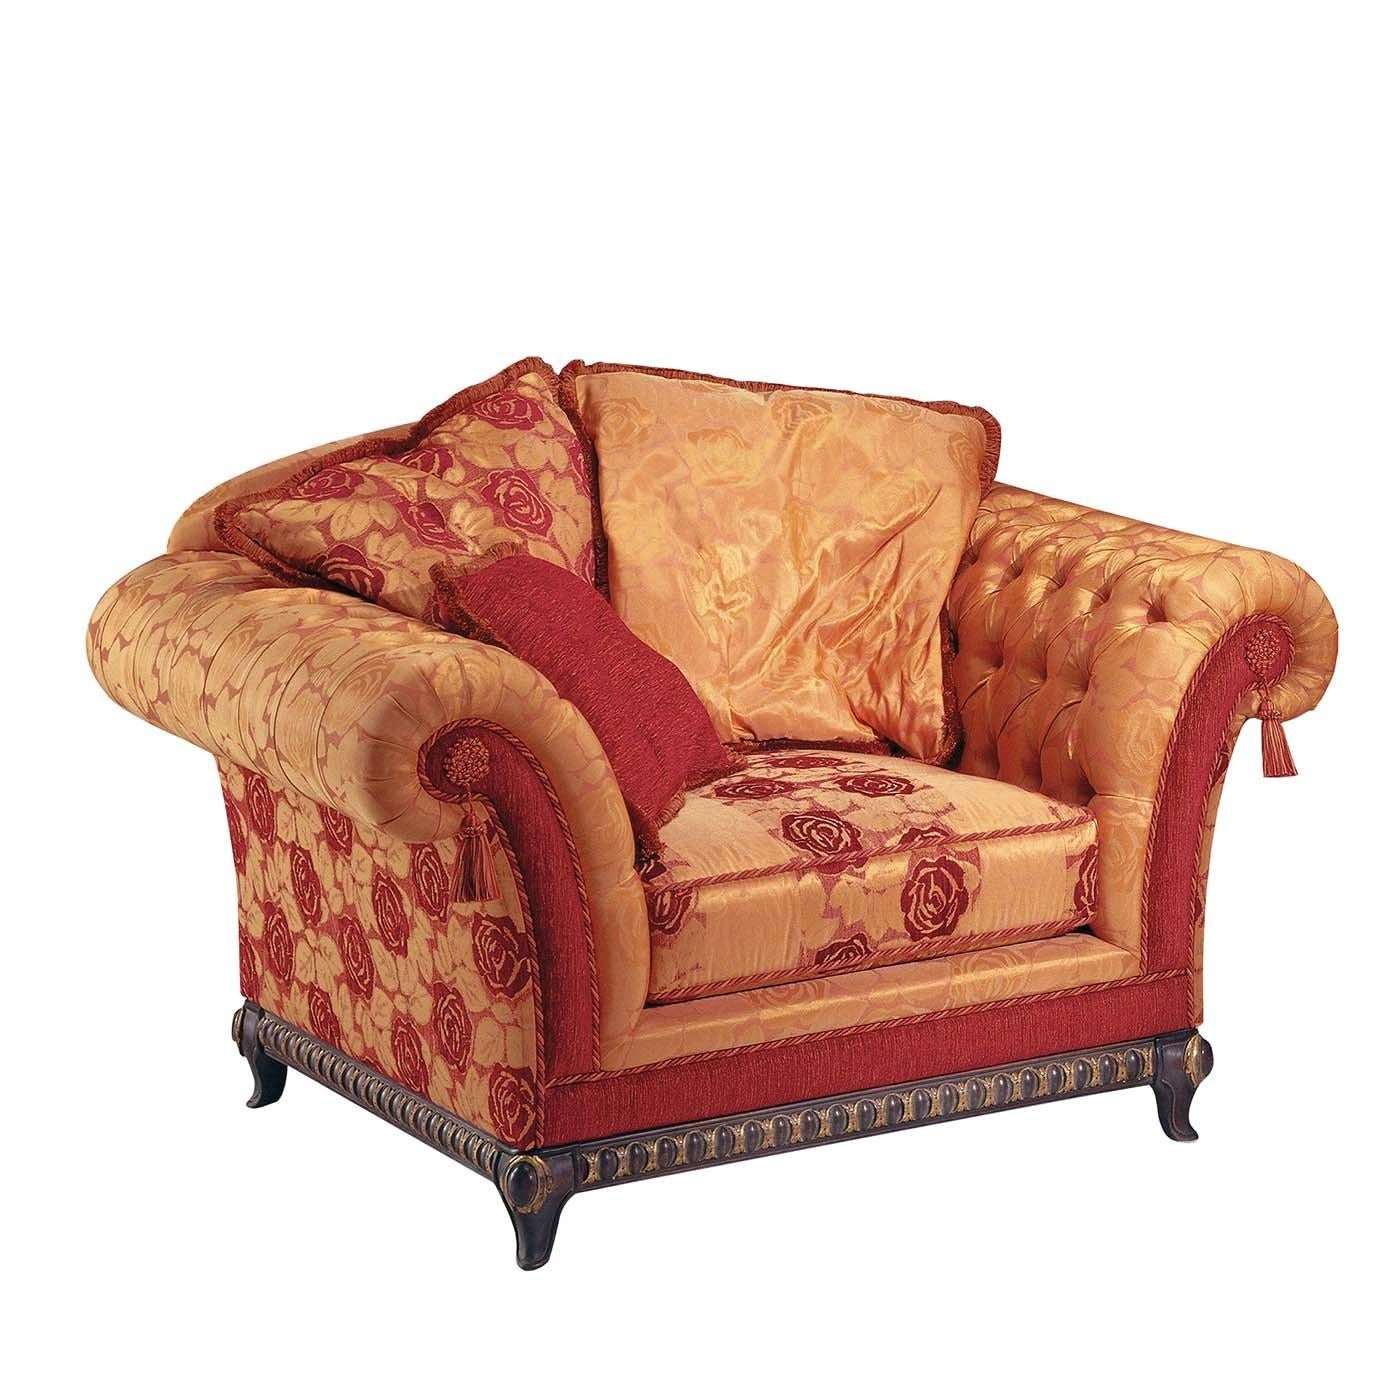 A wooden base with narrow and rounded legs supports this fabric armchair in orange and red tones. The Capitonnè-style padding on the backrest, smooth fabric with floral pattern for the seat and for the external sides of this classic style piece of